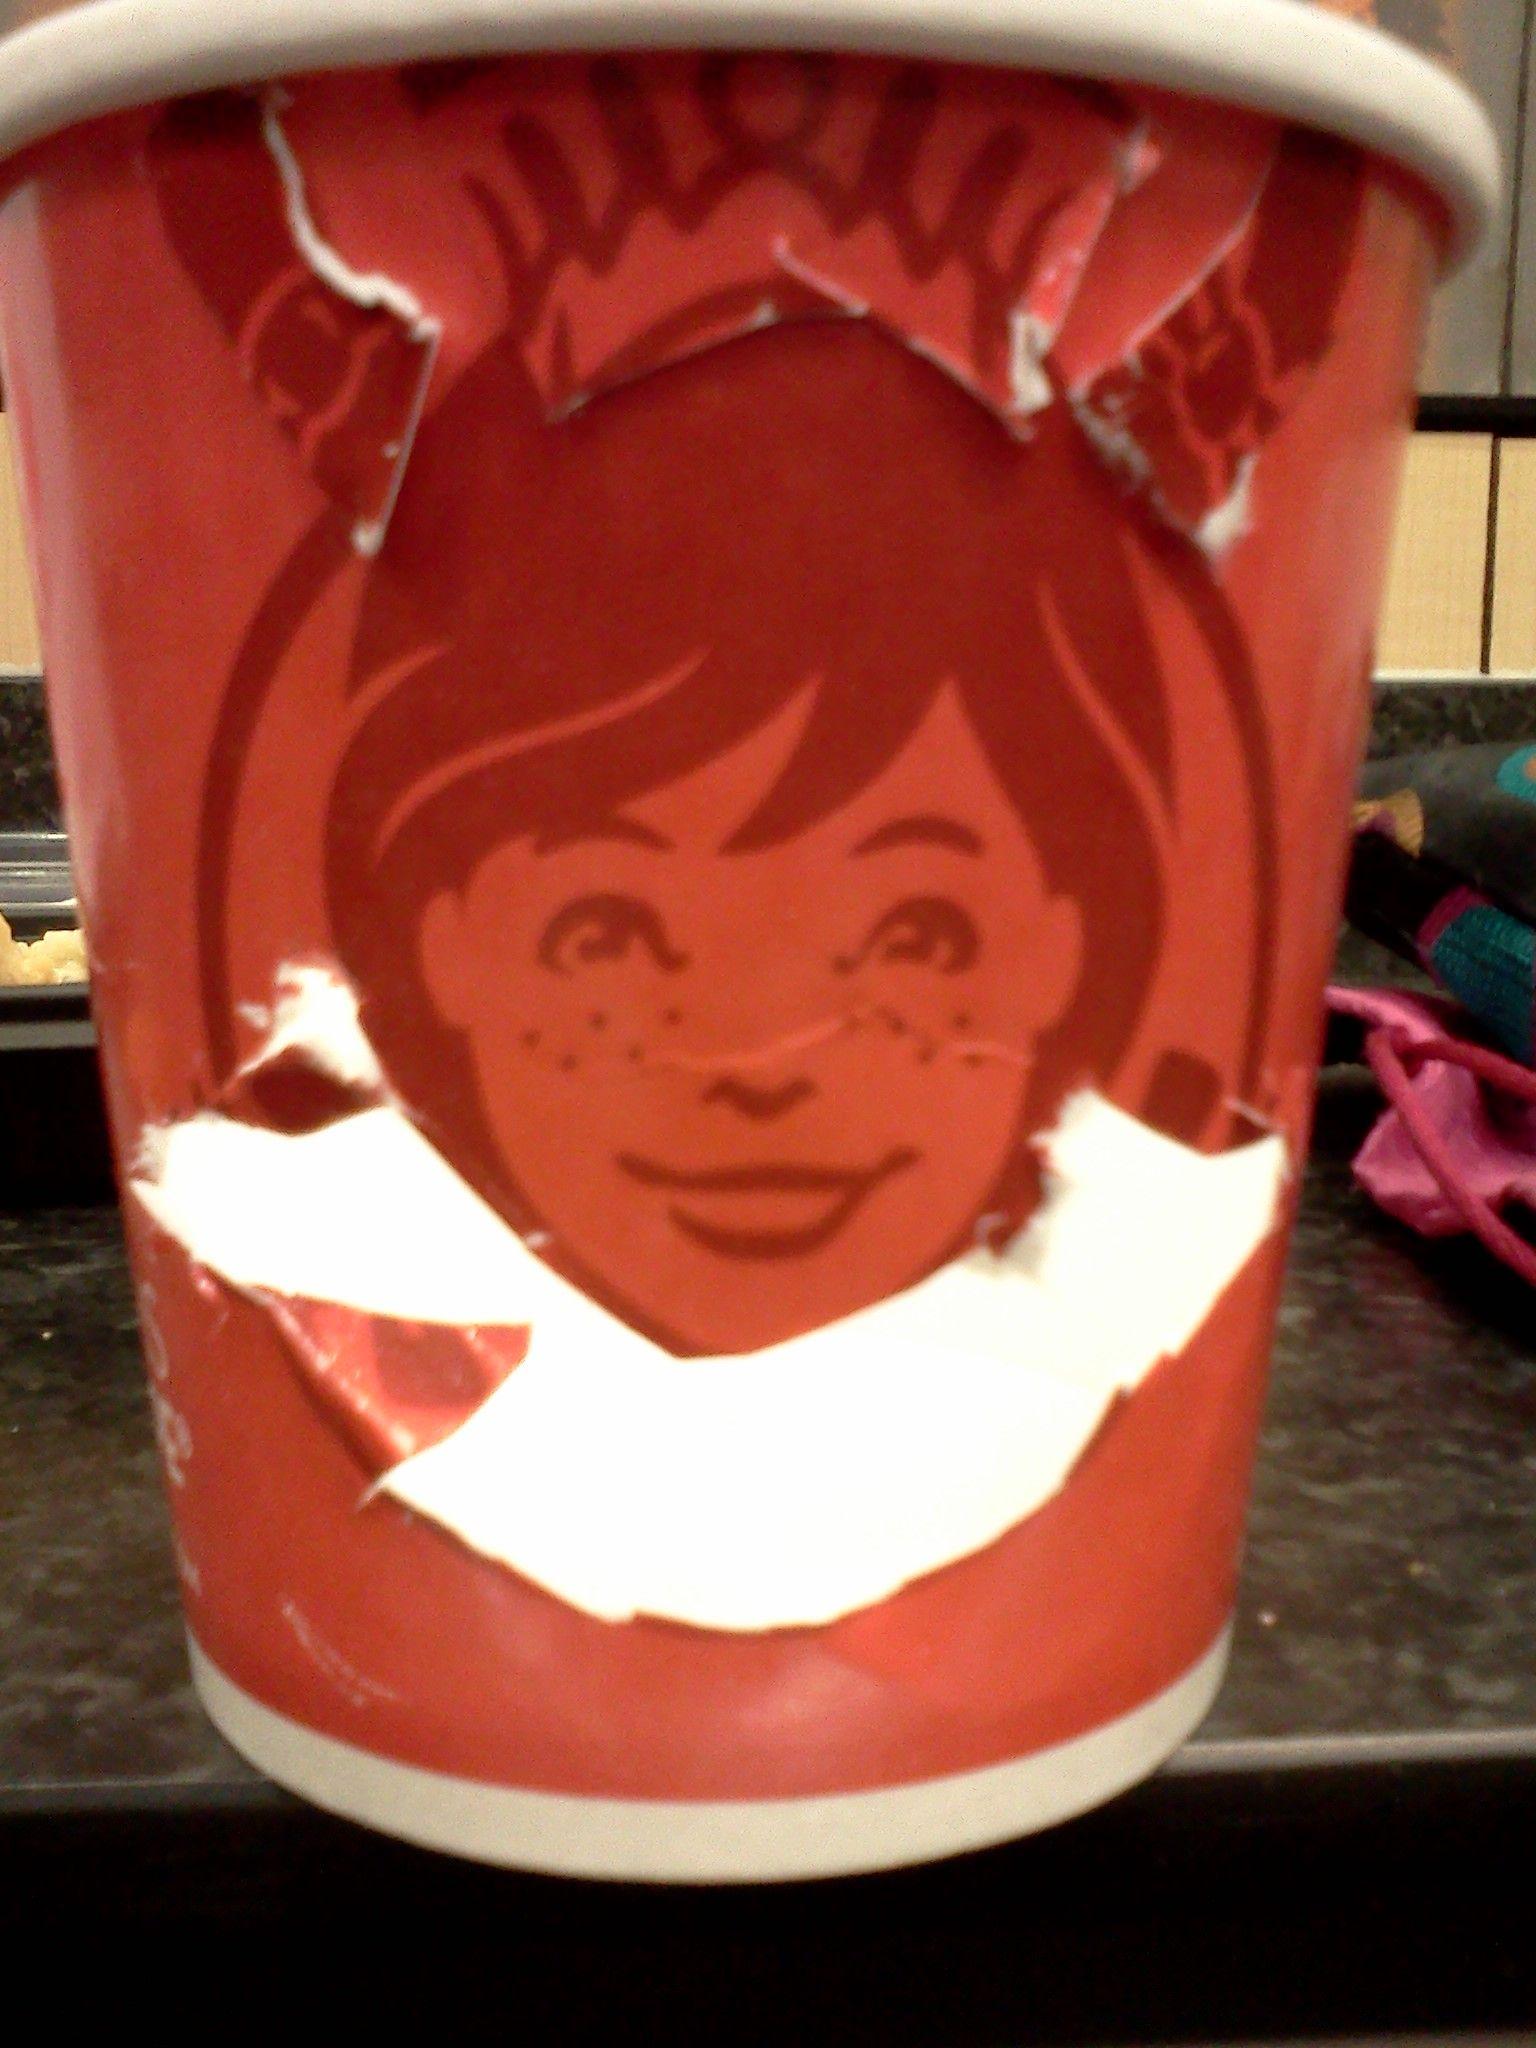 New Wendy's Logo - You Are Being Brainwashed 1-The New WENDY'S Logo Is Inverse Satanic ...